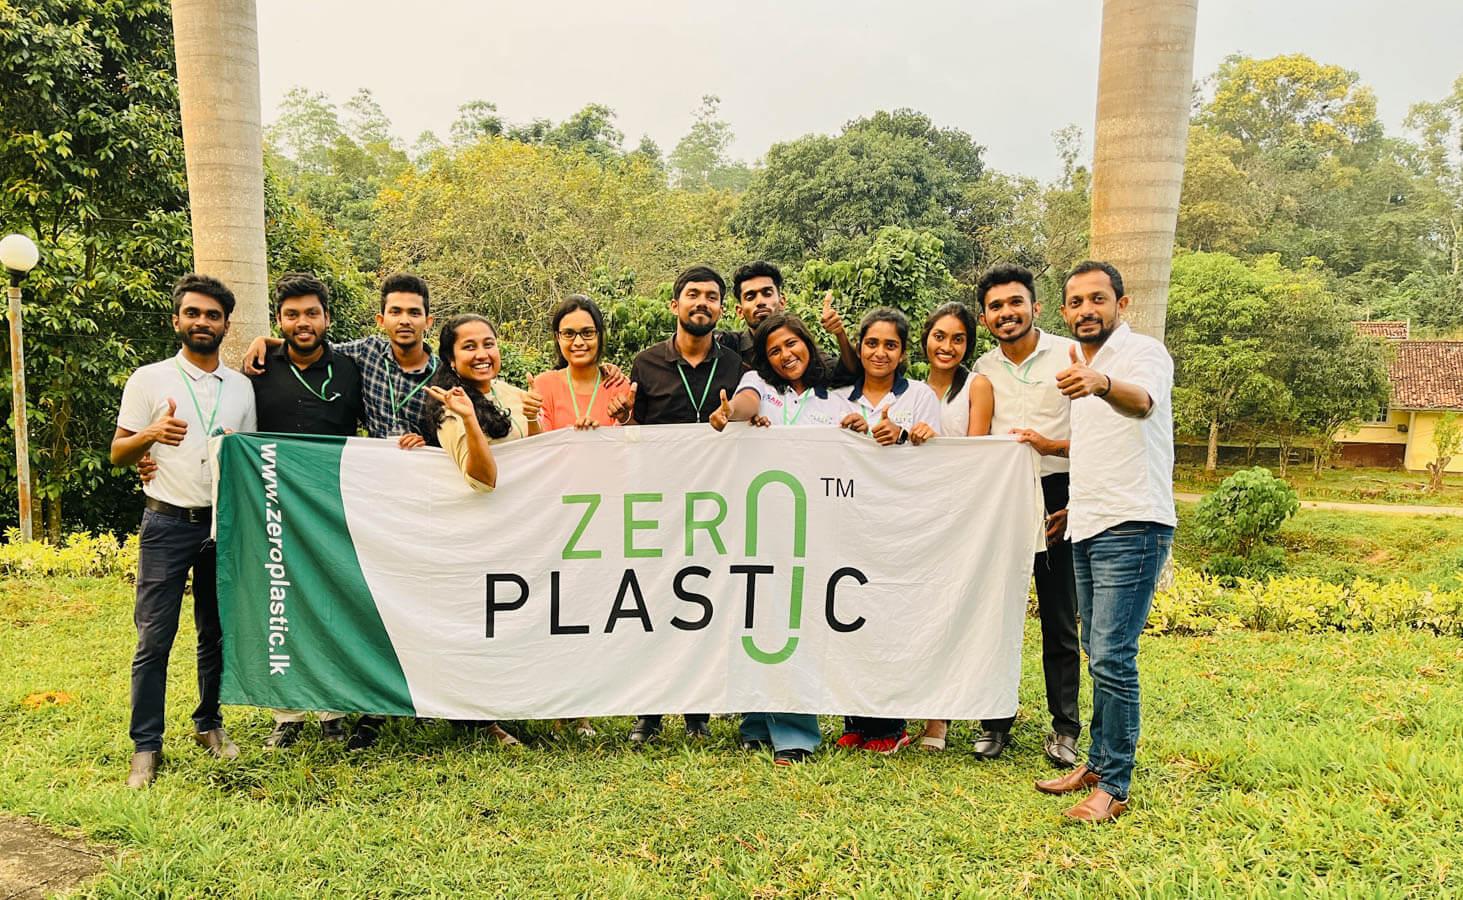 Relying on dozens of regional clubs, The Zeroplastic Movement has amassed a collective of over 9,000 Sri Lankan volunteers. Photo: Zeroplastic Movement.